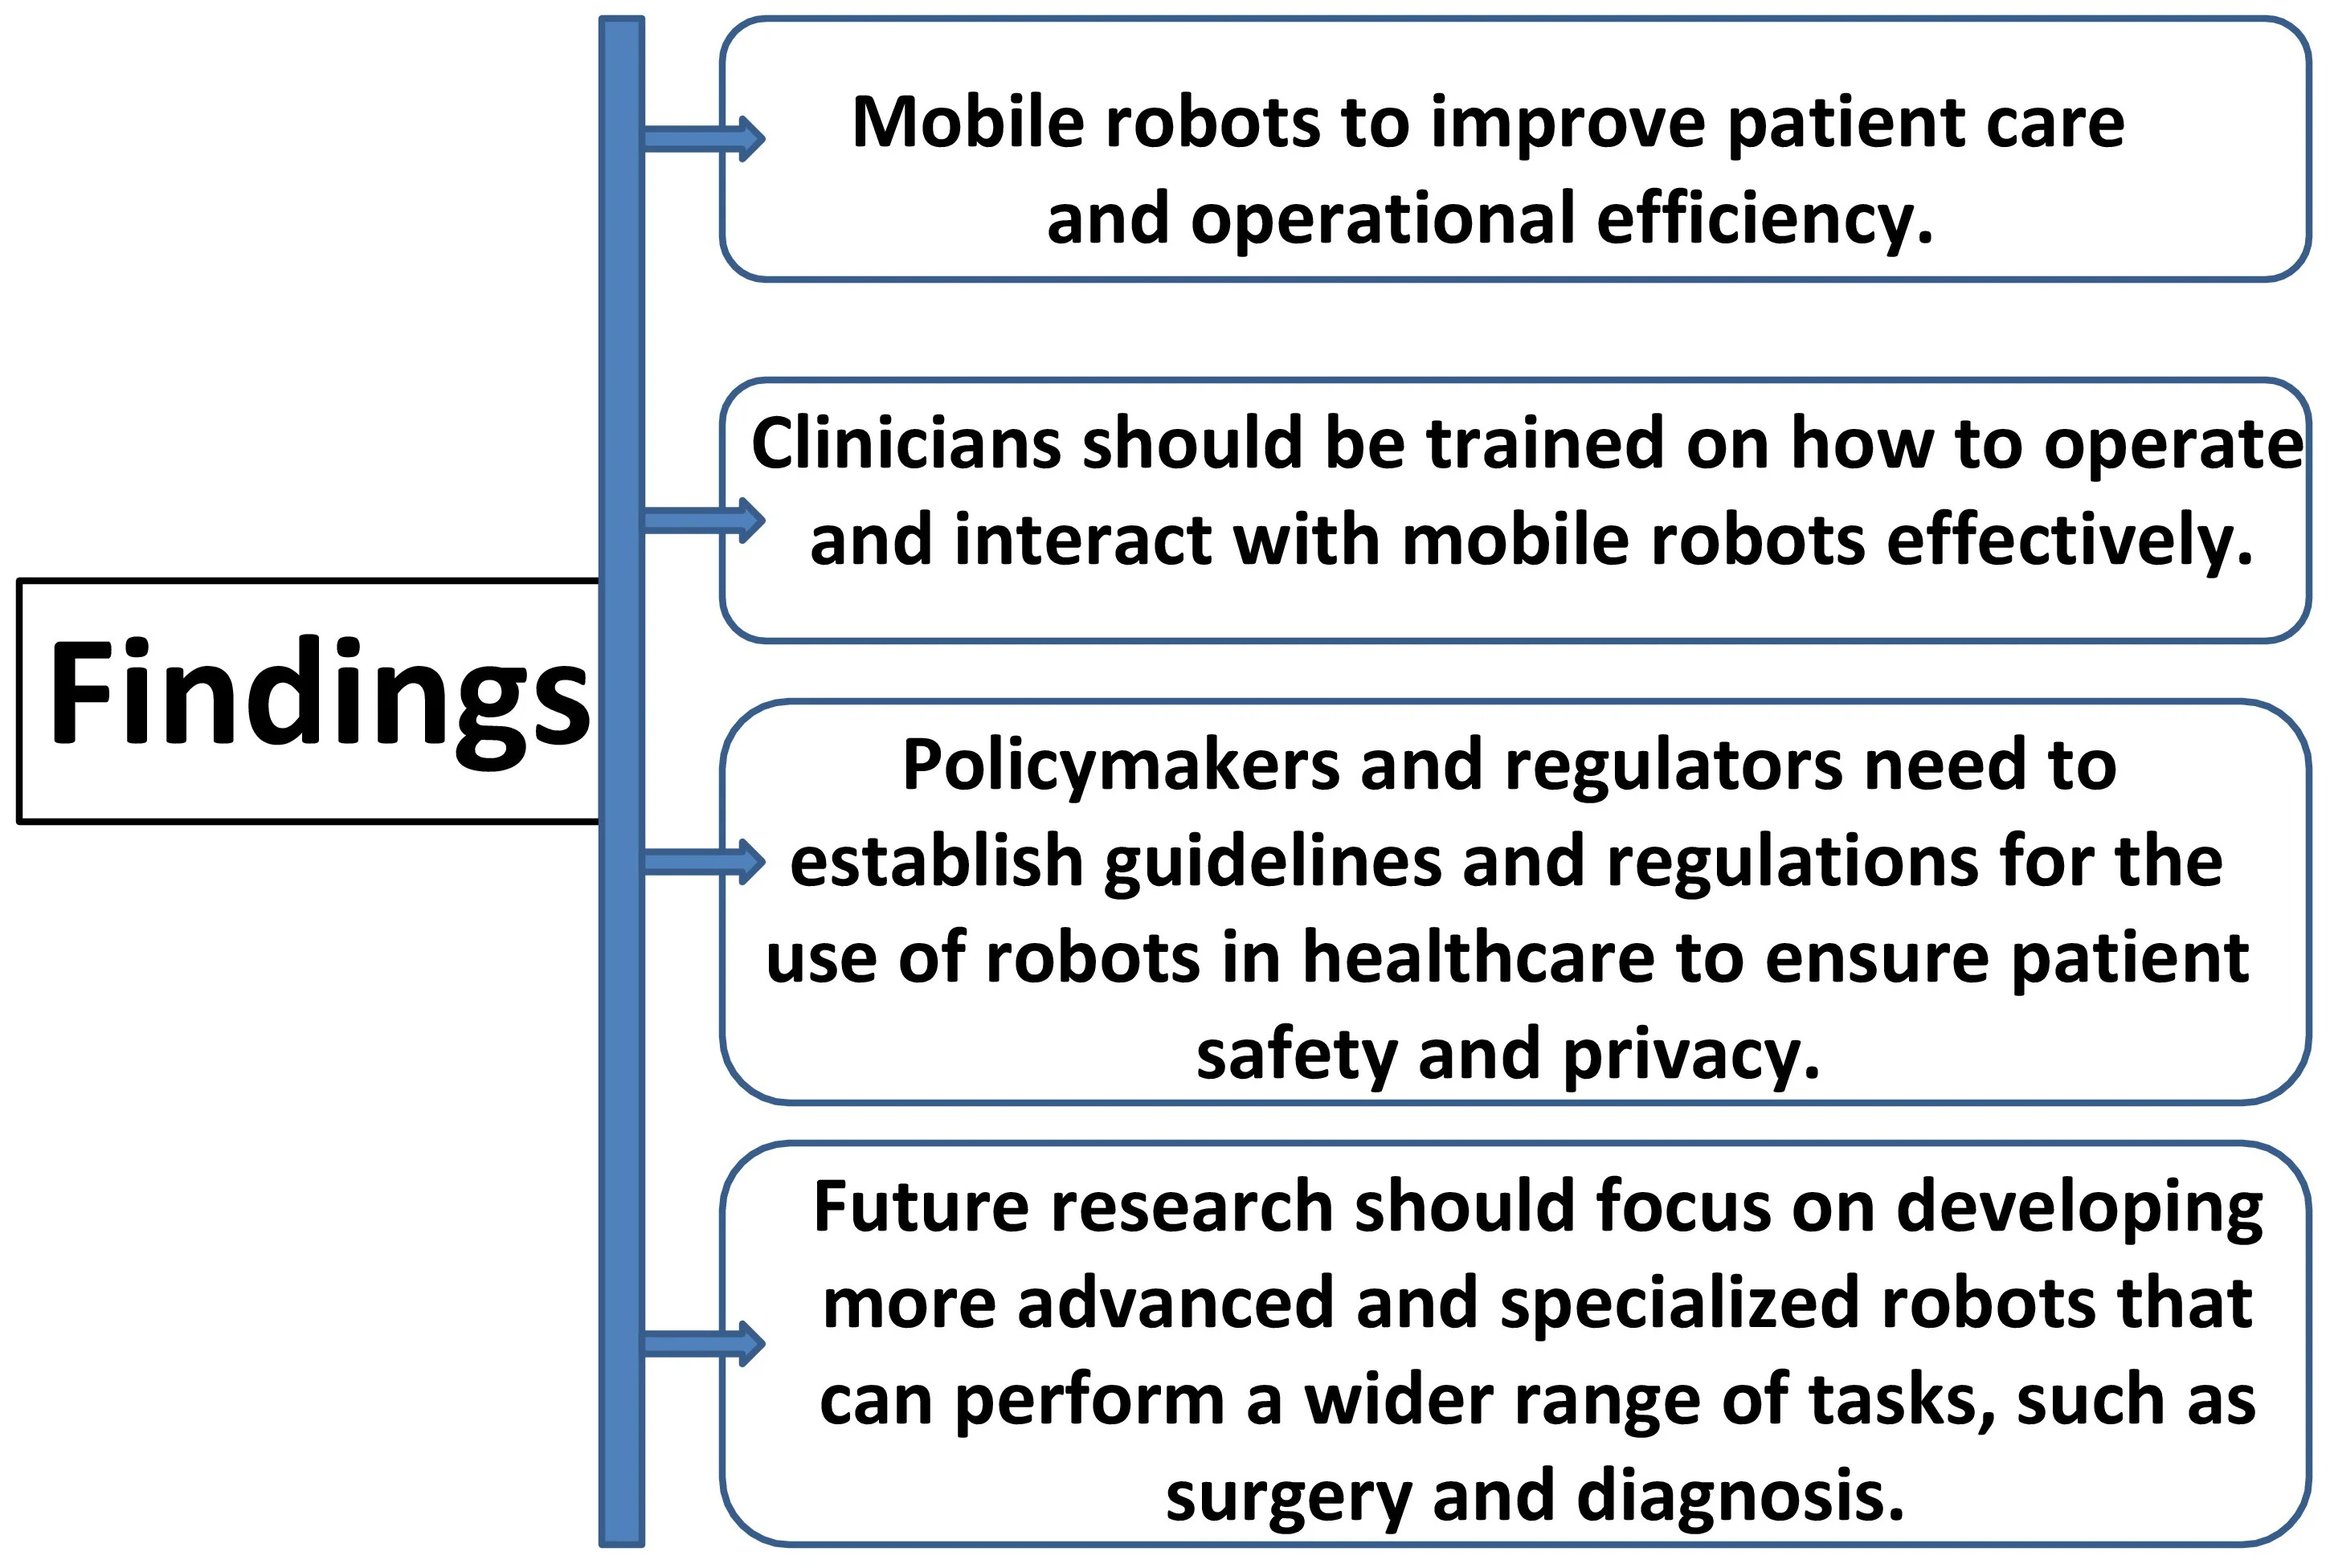 Challenges and opportunities for enhanced patient care with mobile robots in healthcare